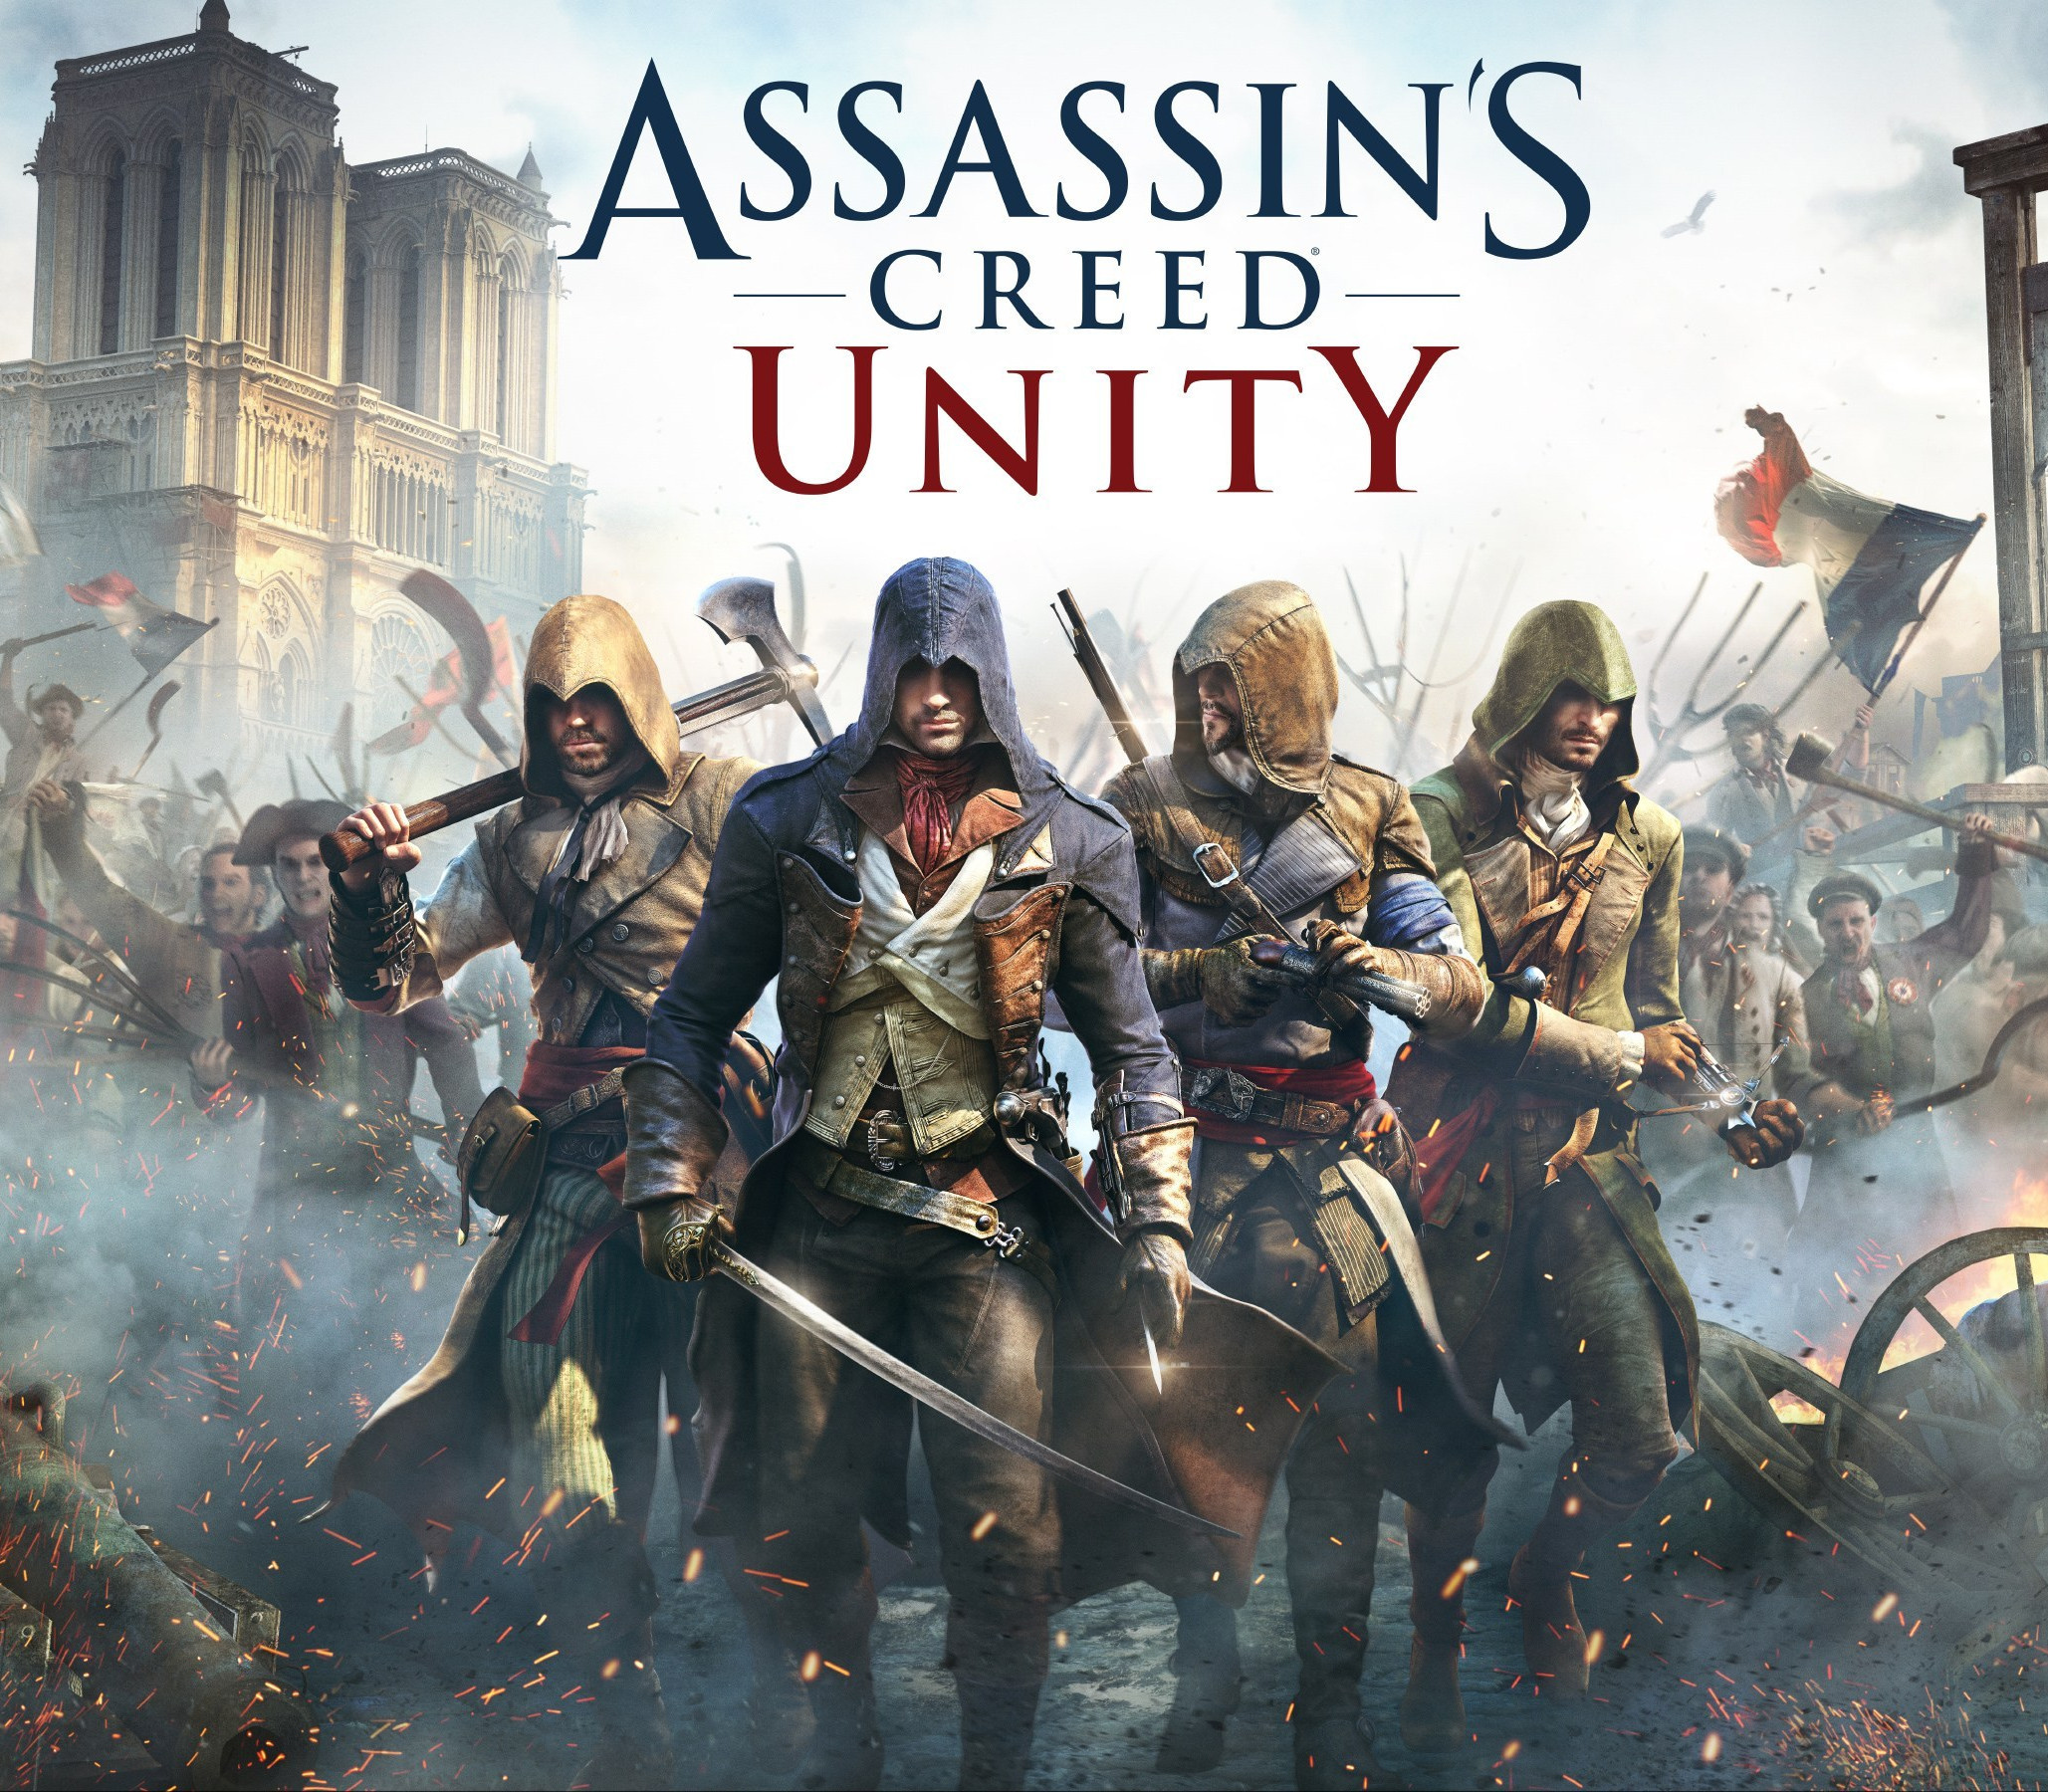 Assassins creed unity free steam keys and xbox one codes with playstation 4  image wallpaper by Assassins Creed Unity Download Free - Issuu